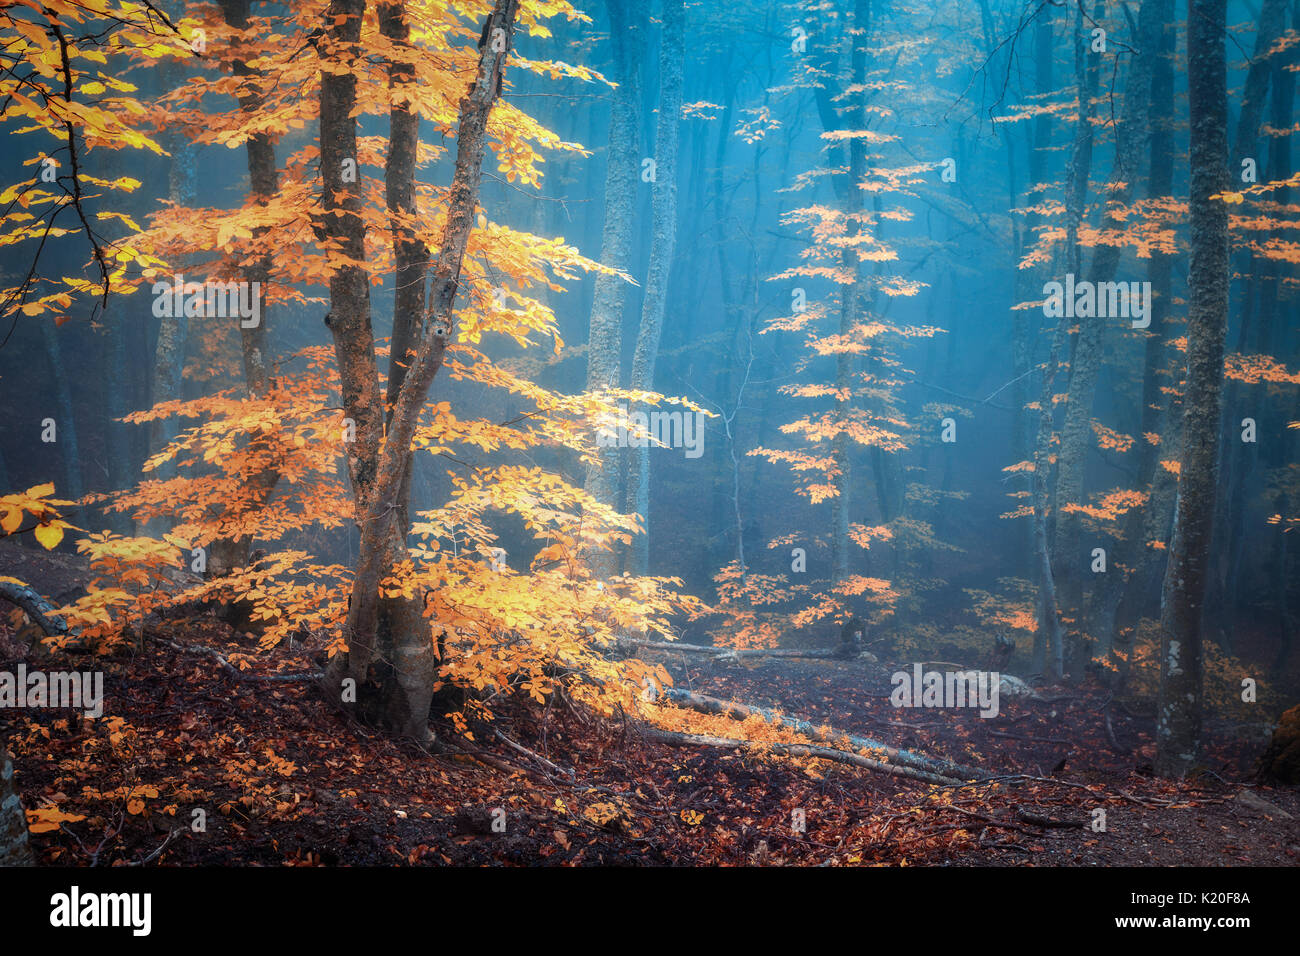 Autumn foggy forest. Mystical autumn forest in blue fog in dusk. Old Tree. Landscape with trees, colorful orange leaves and fog. Nature. Enchanted fog Stock Photo